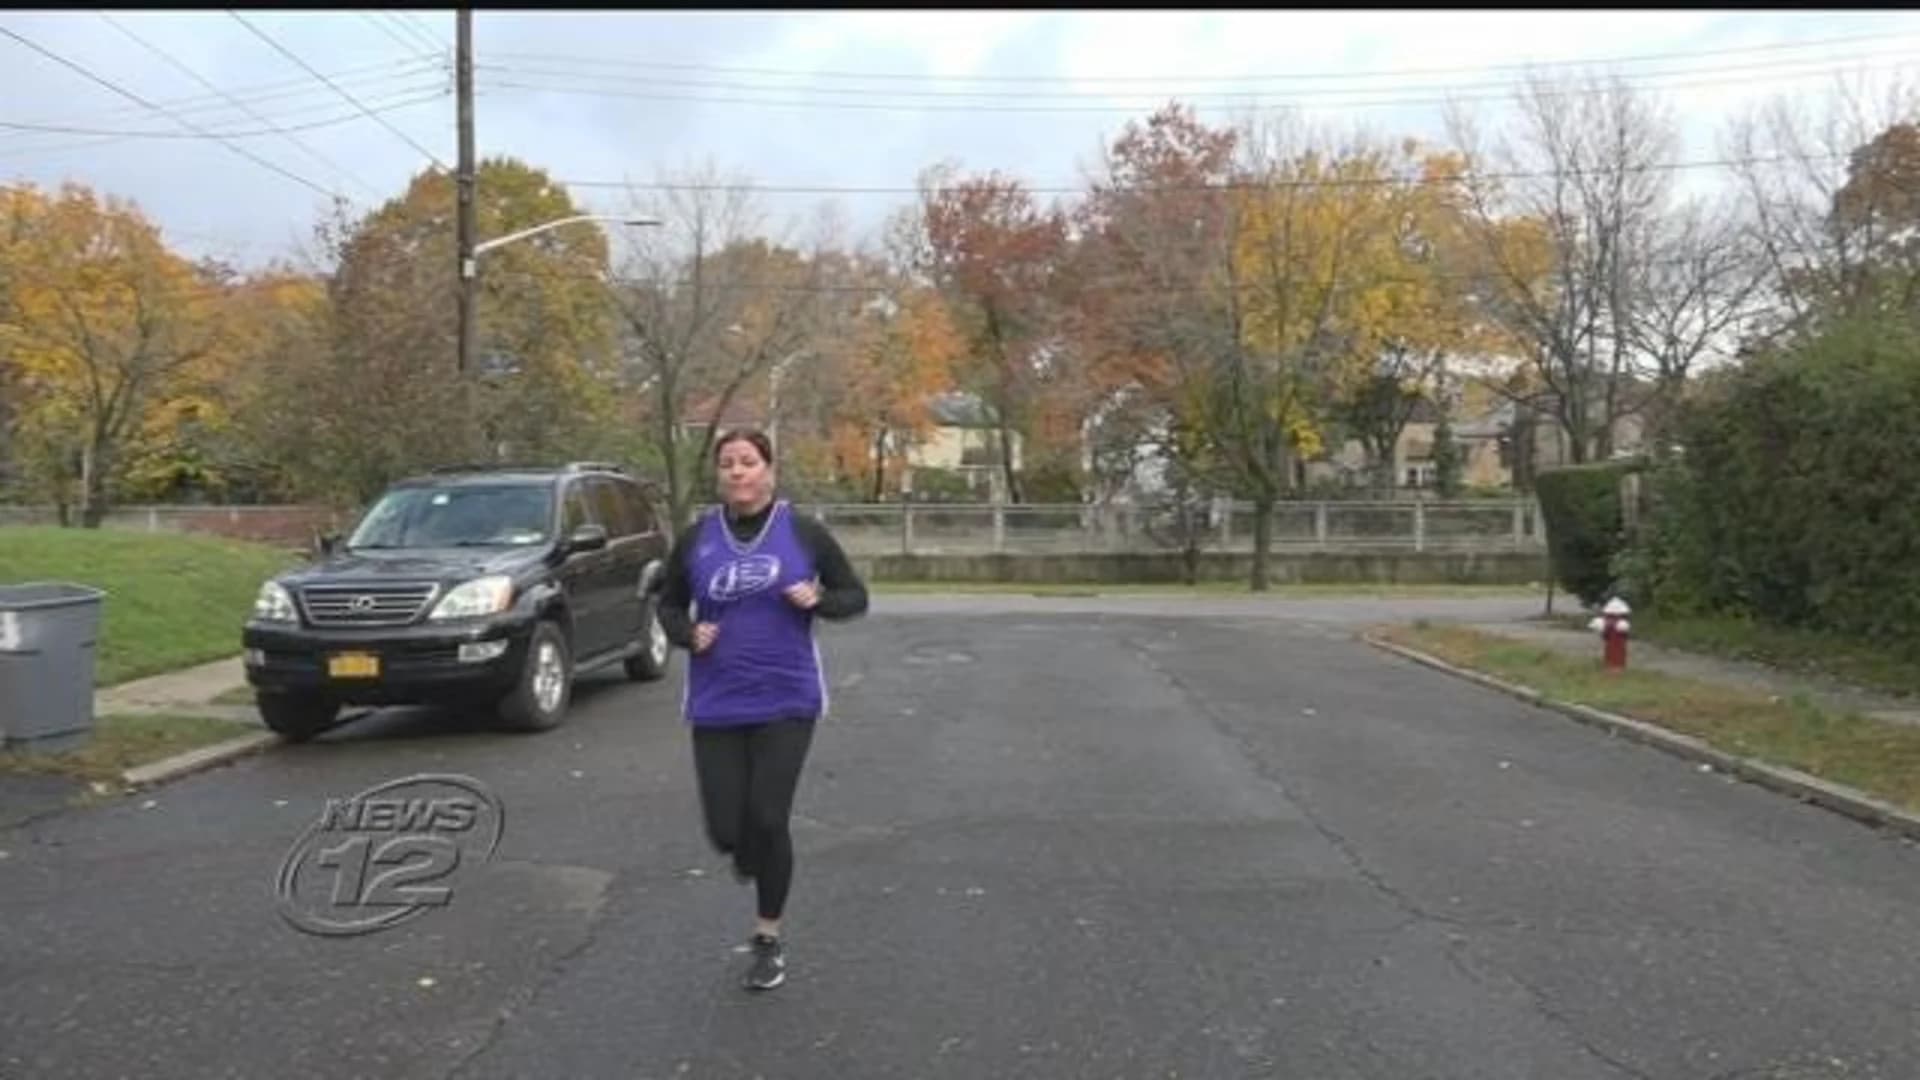 Mount Vernon woman with lupus fired up for NYC Marathon